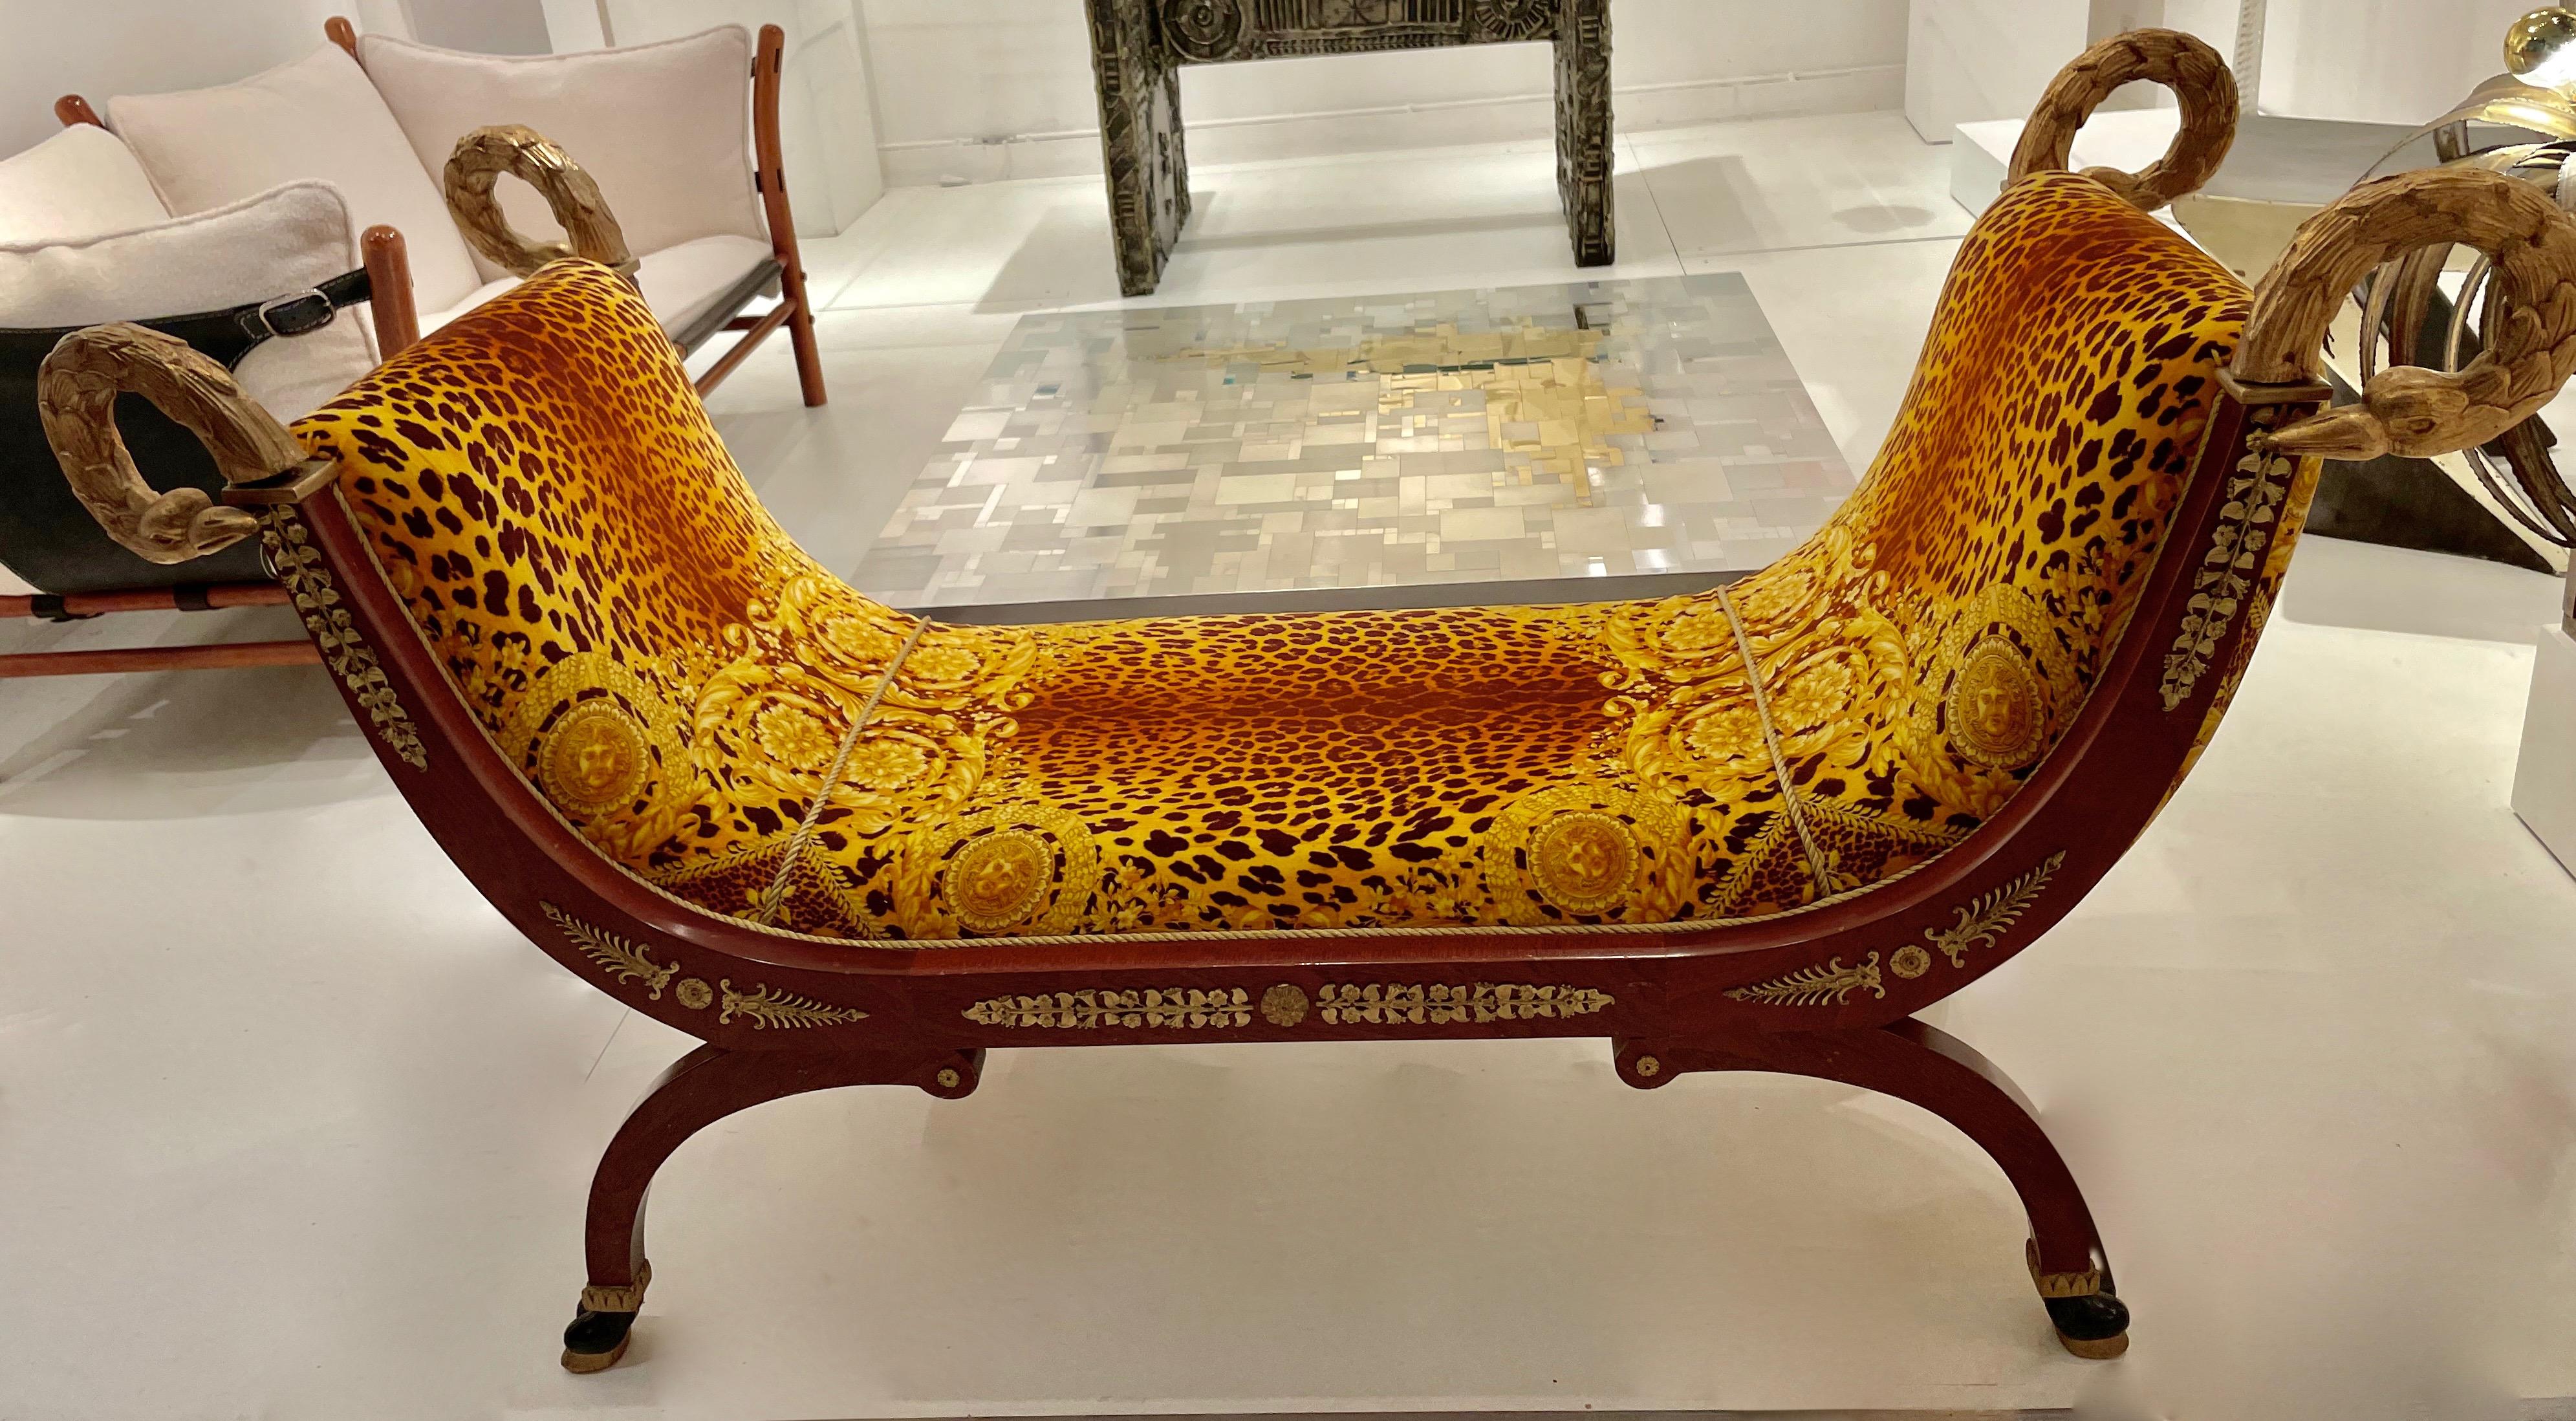 Elegant Empire revival daybed beautifully hand carved with gold leaf swans
heads, brass details and covered with a Gianni Versace silk.
Part of G.Versace furniture collection created in 1984.
Mint condition.
Italy 1984;